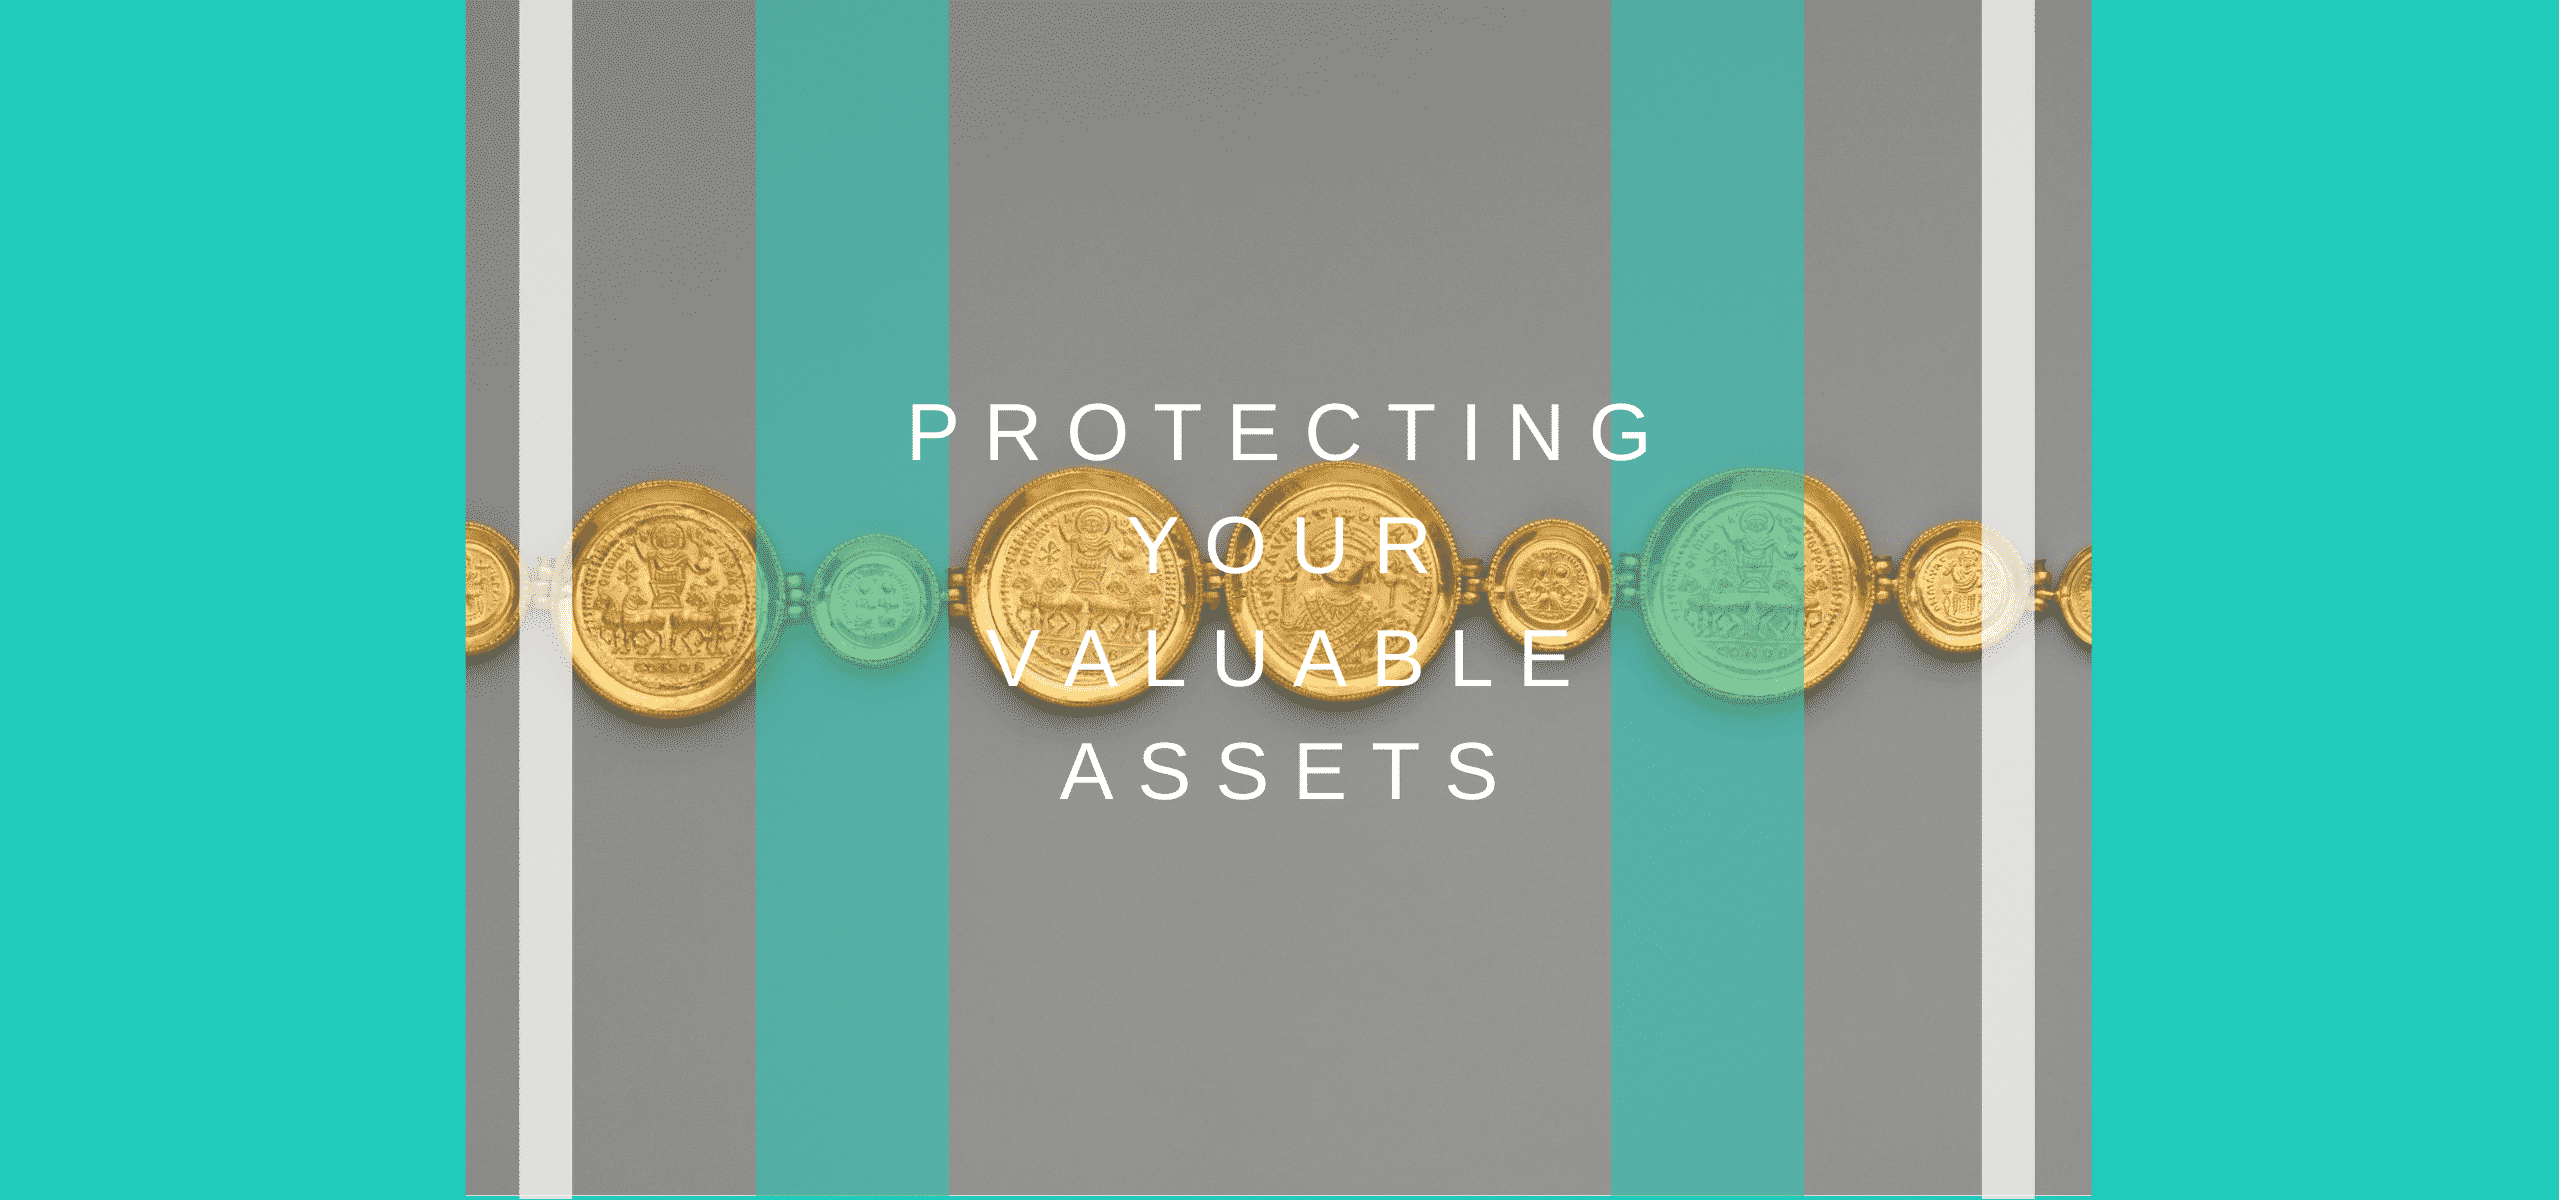 Protecting your valuable assets